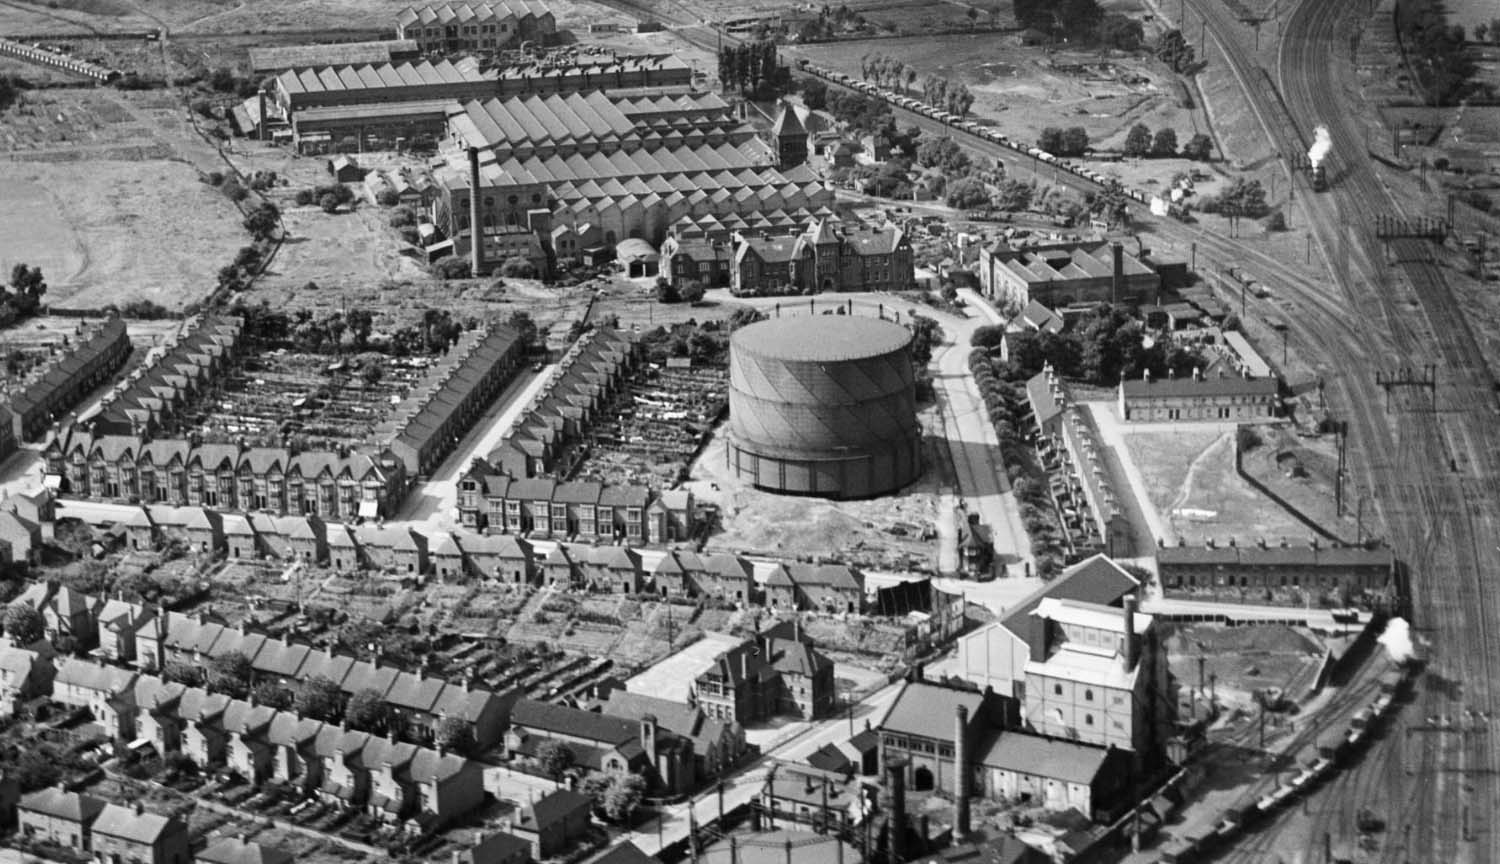 An Easterly 1930 aerial view of English Electric Works with Old Station Square housing adjacent to the turntable